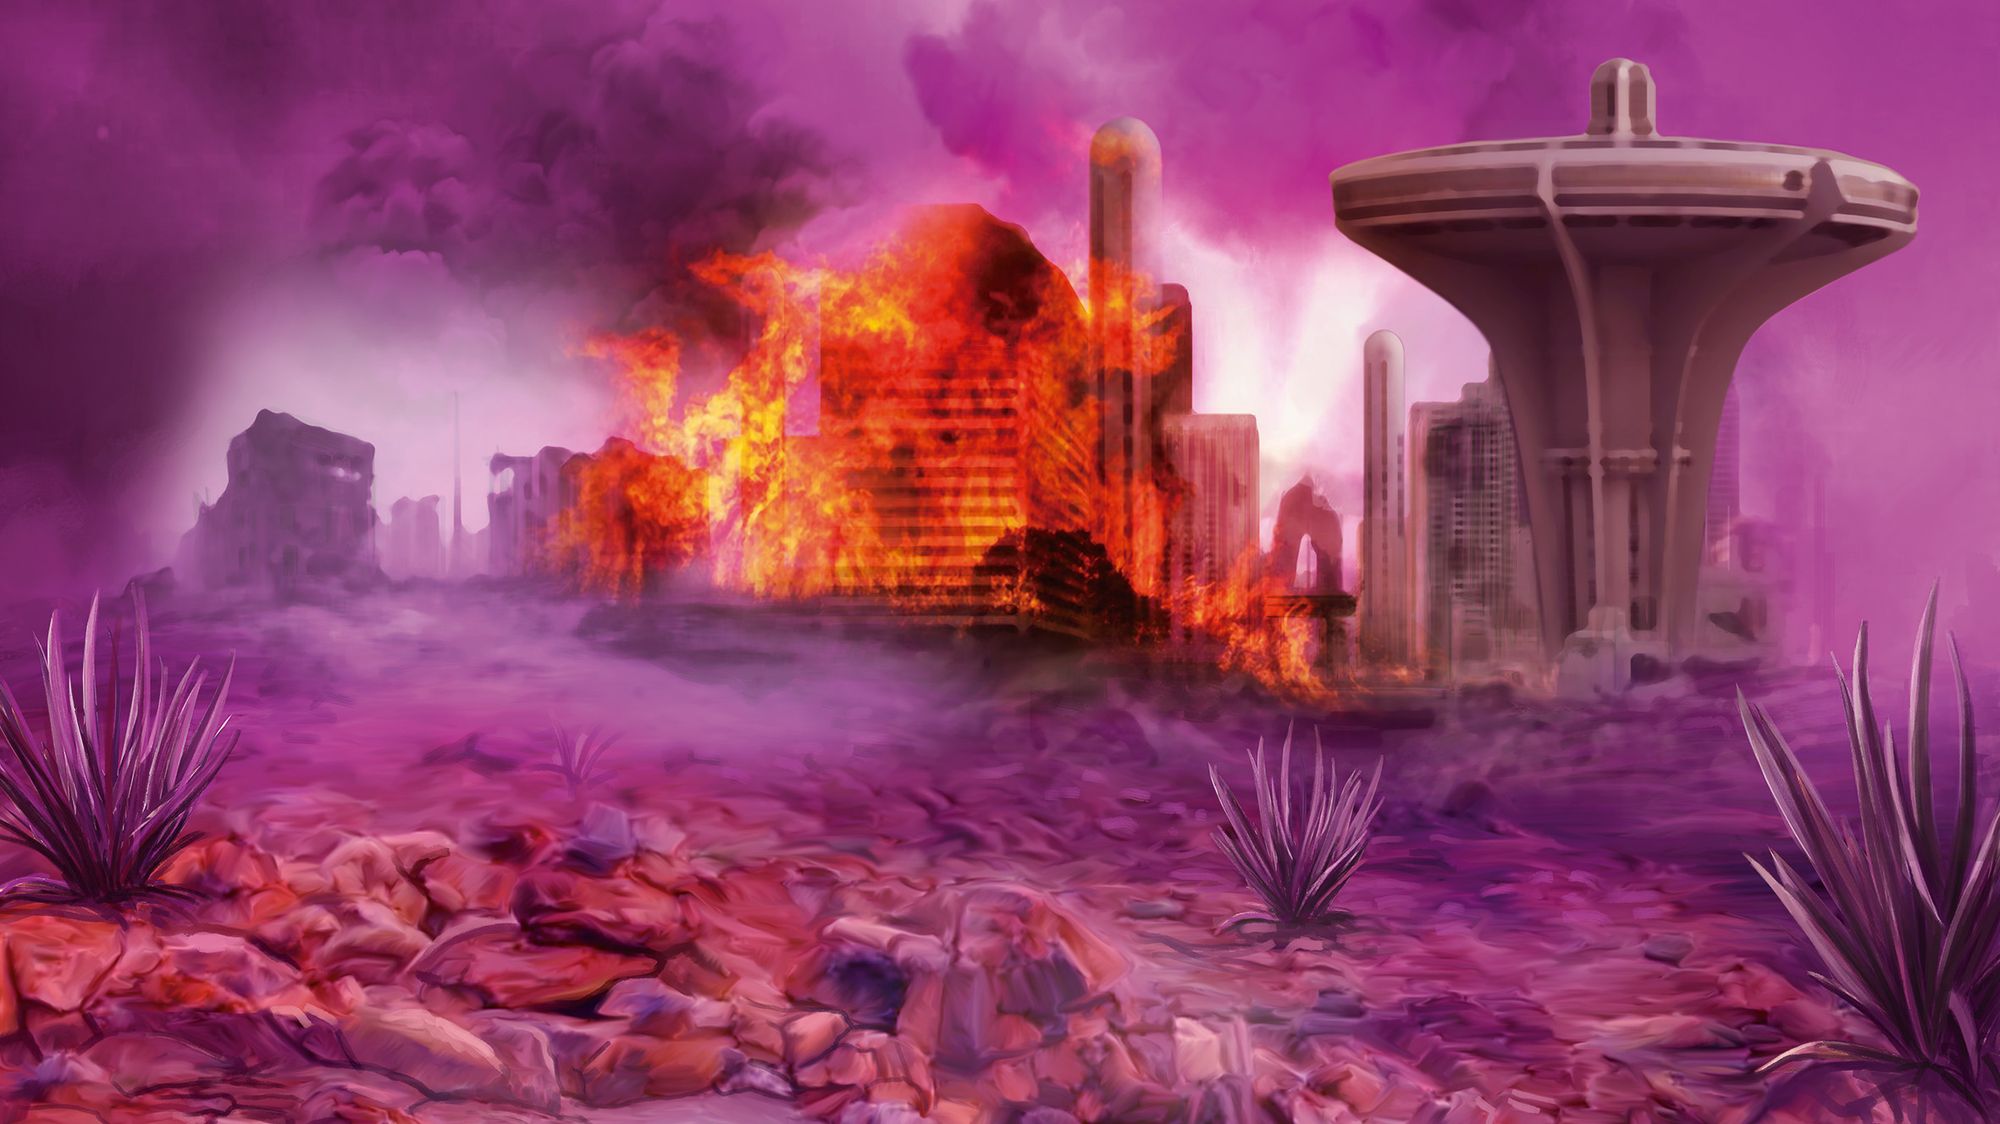 An arid landscape. Purple sky and clouds. In the background, an alien city on fire.